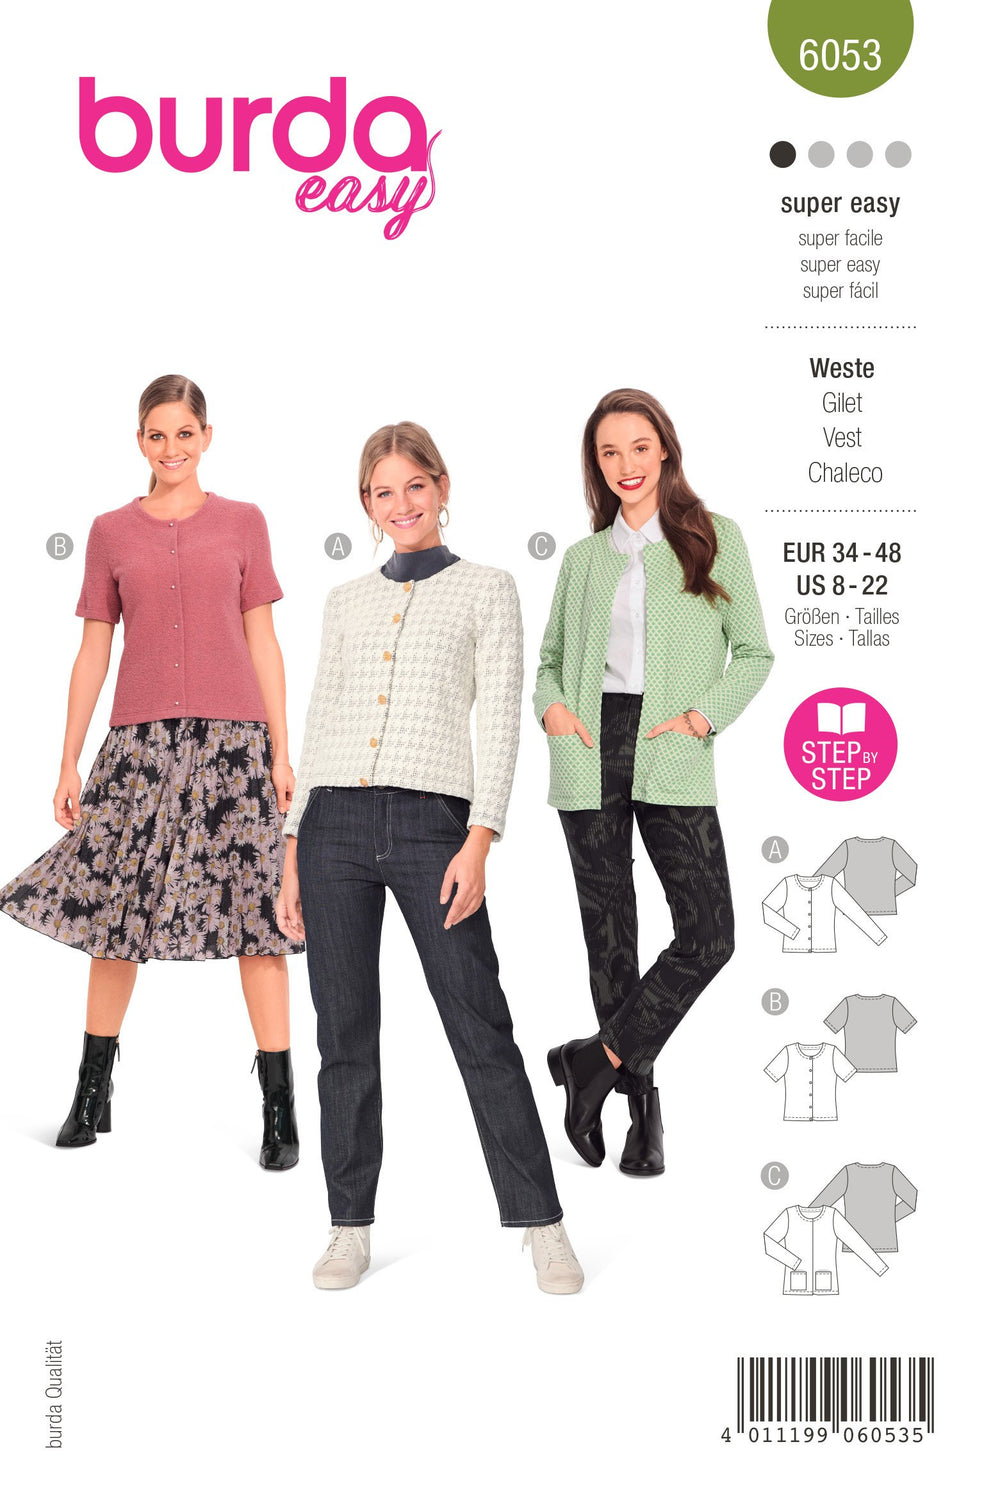 Burda Sewing Pattern 6053 Cardigan with Rounded Neckline from Jaycotts Sewing Supplies